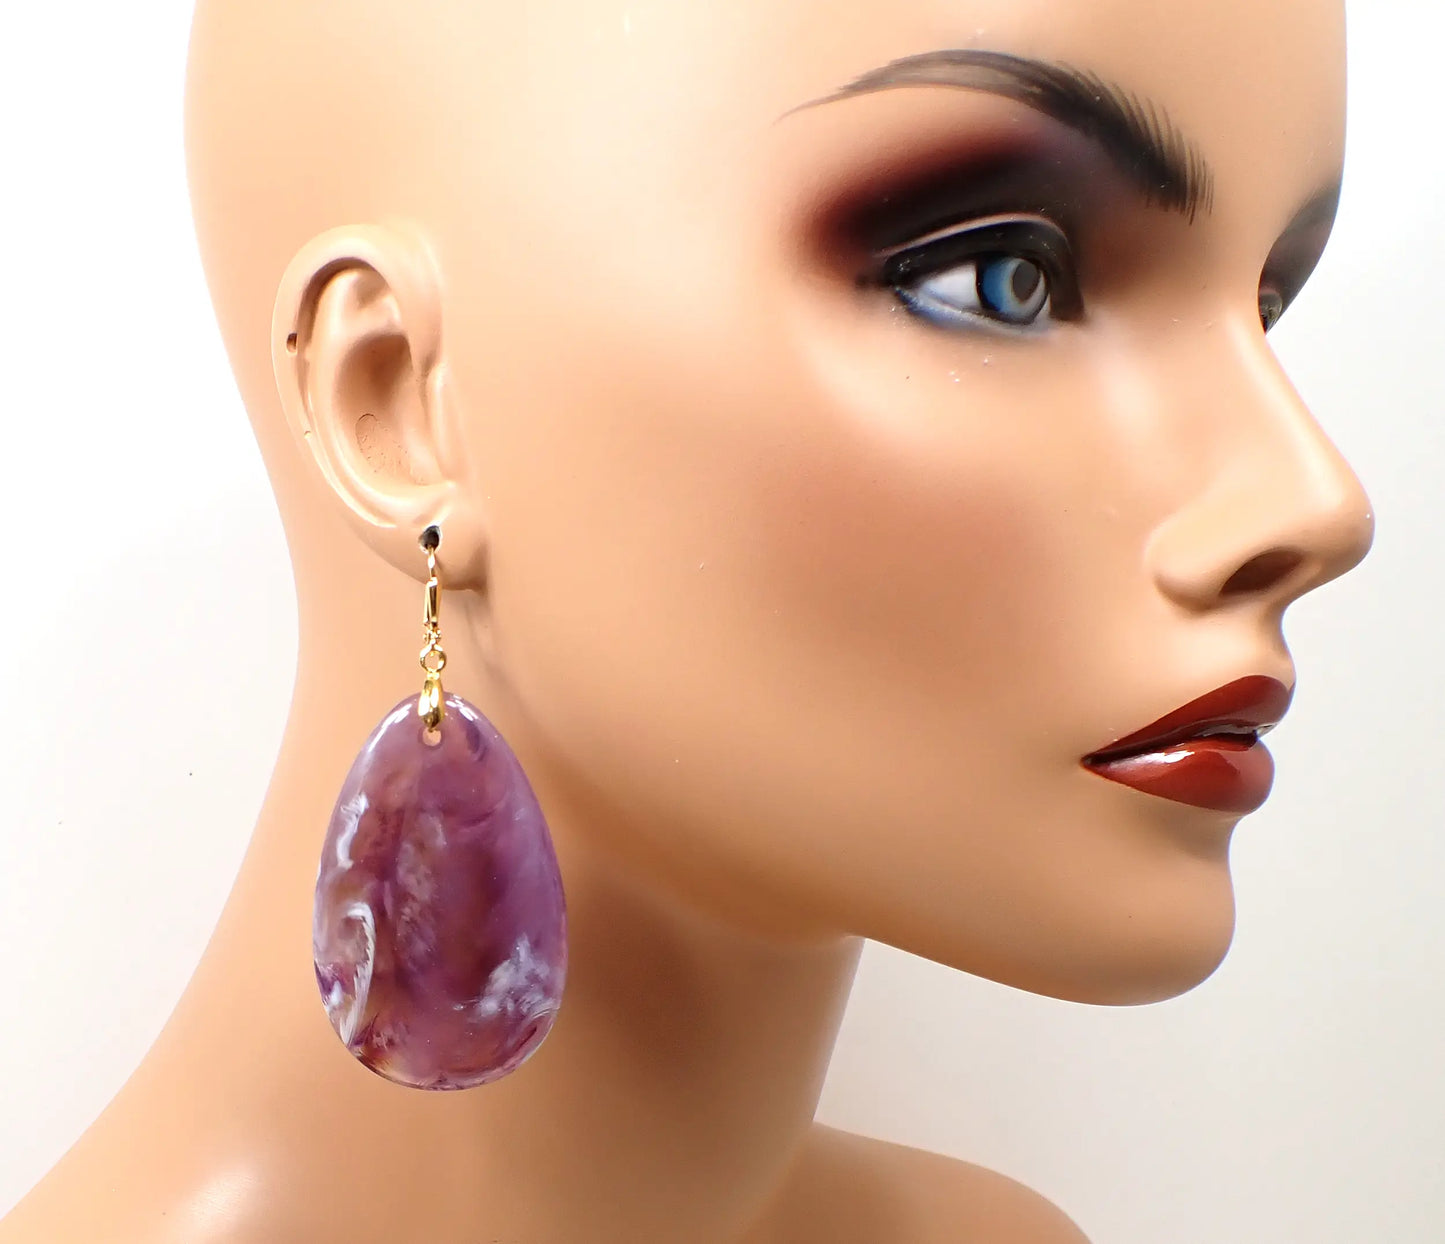 Big Heavy Marbled Purple Acrylic Teardrop Handmade Earrings, Maximalist Jewelry, Gold Plated Hook Lever Back or Clip On